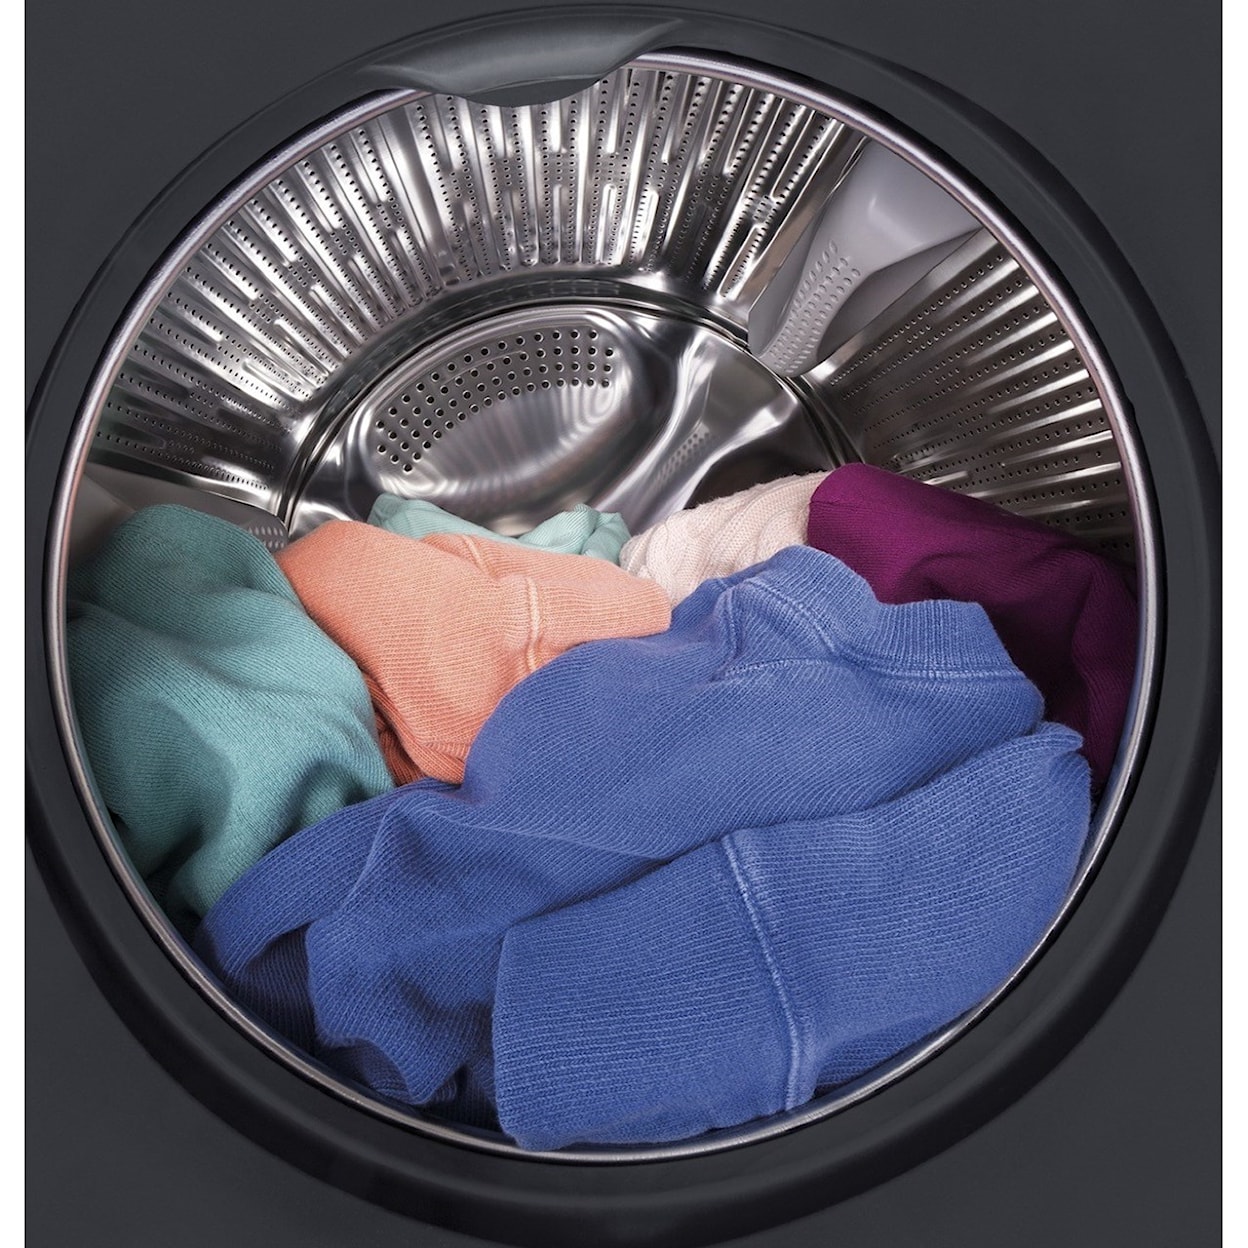 GE Appliances Front Load Washers - GE GE® 24" 2.4 Cu. Ft. ENERGY STAR® Washer